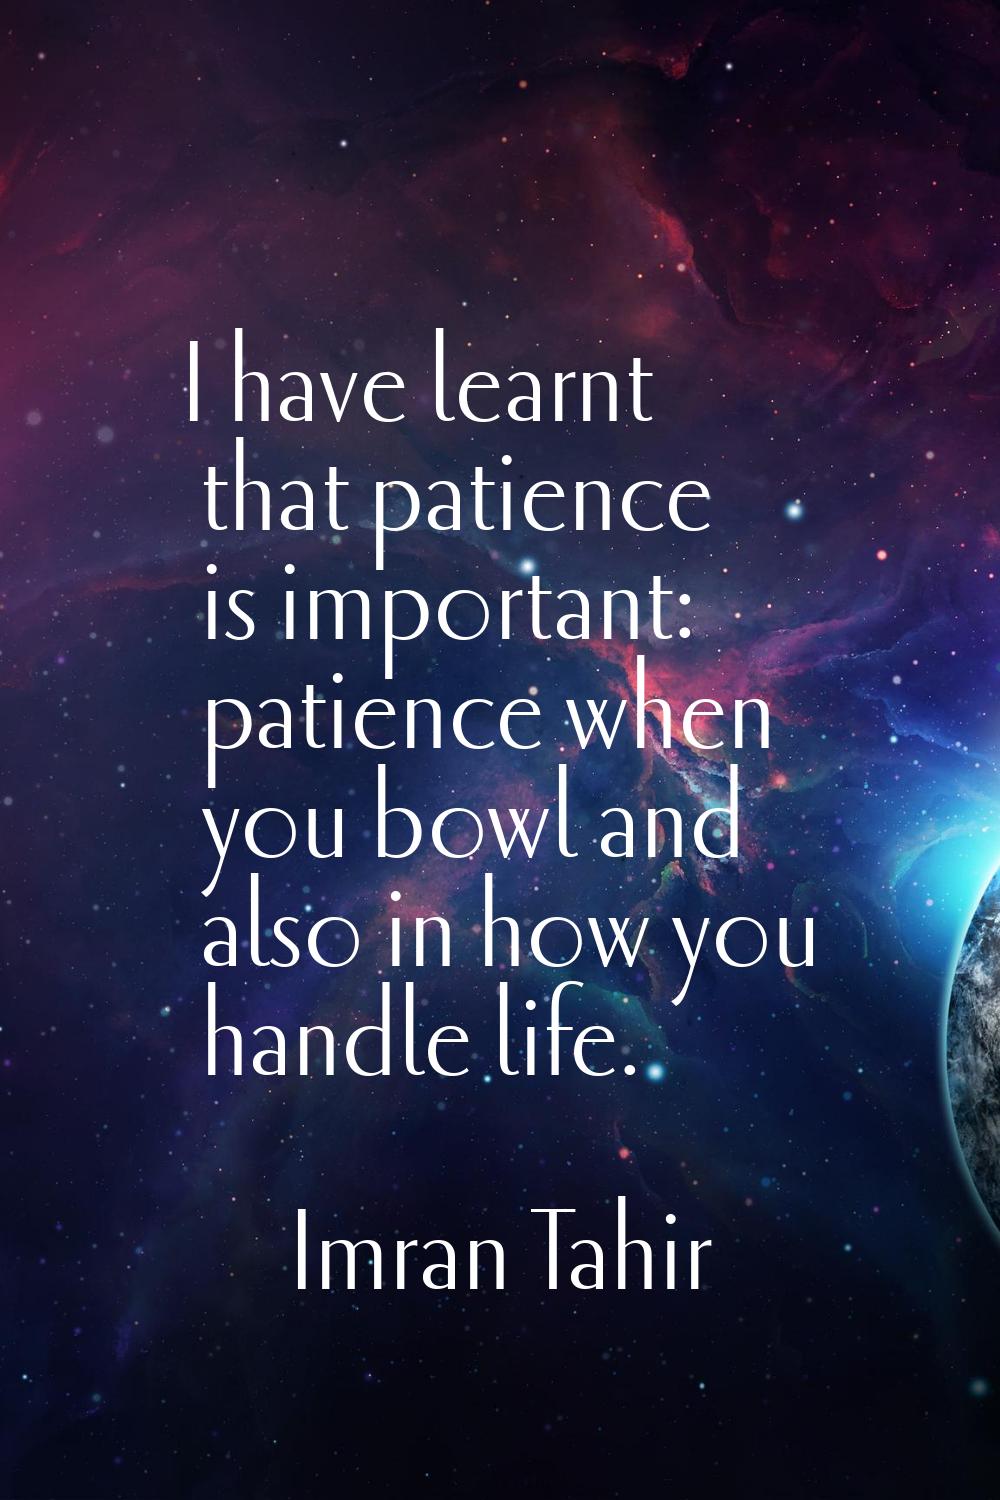 I have learnt that patience is important: patience when you bowl and also in how you handle life.